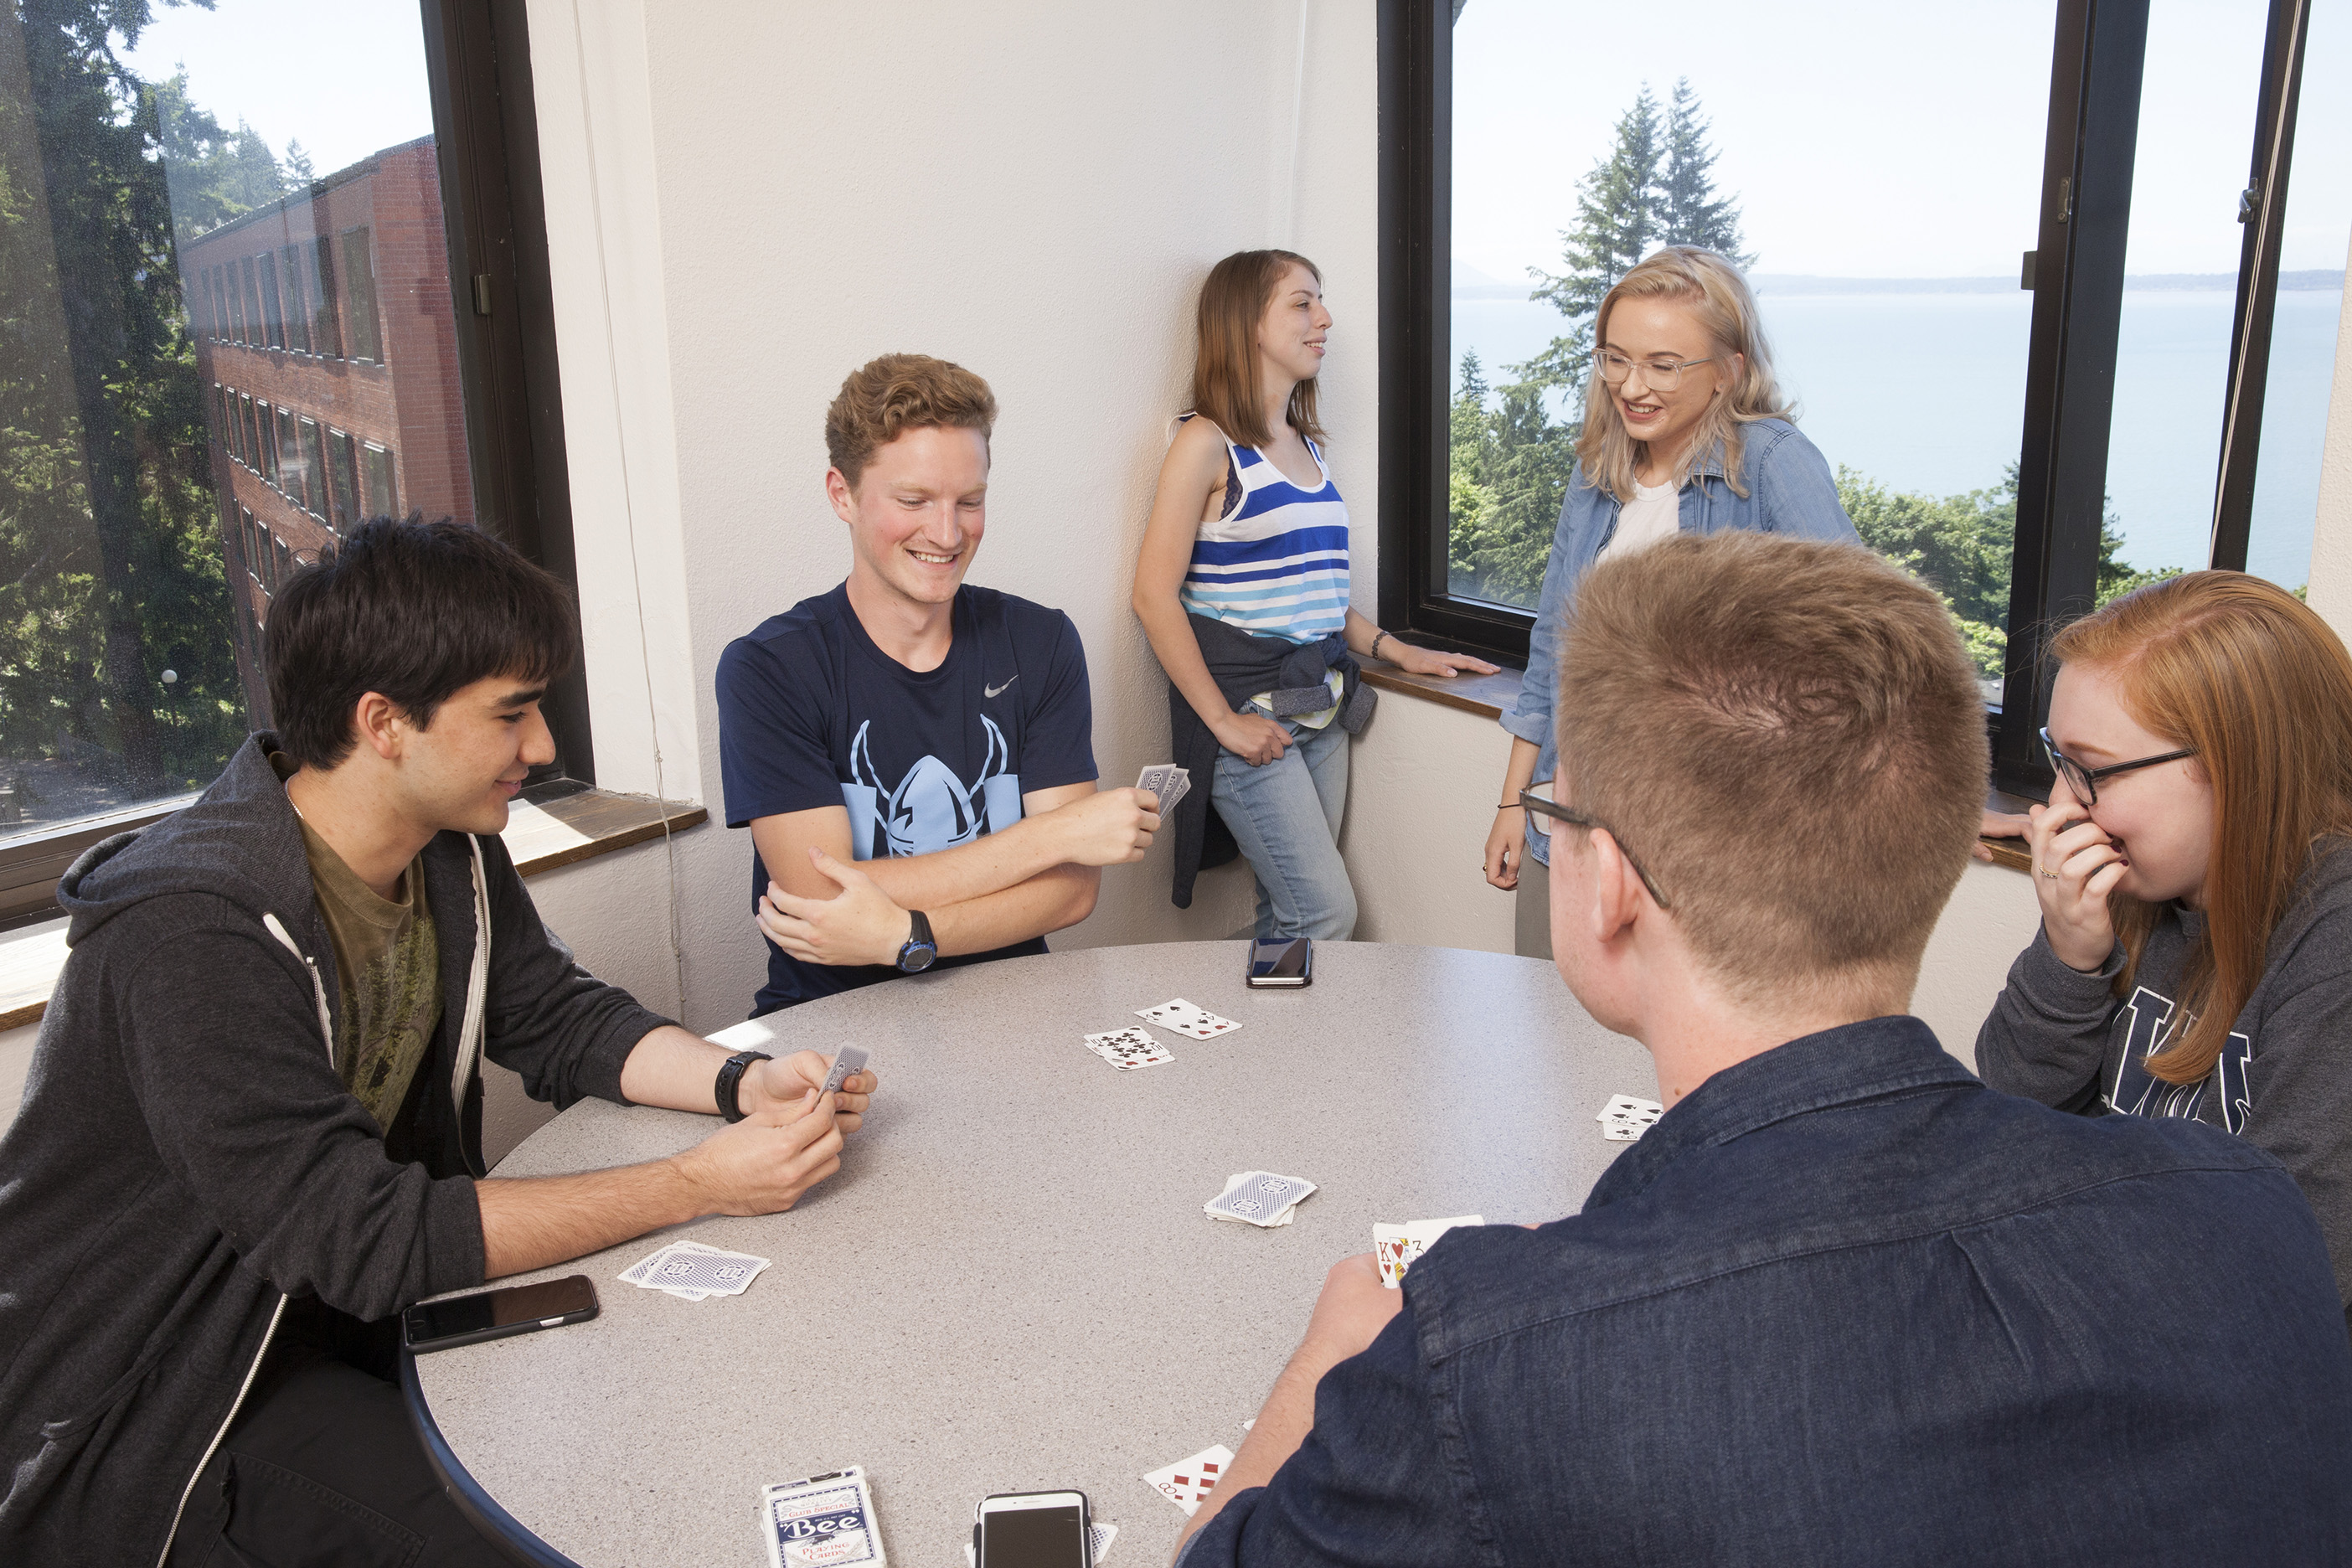 Four students play cards in the foreground while two other students sit on the window sill in the background. Taken in a Nash Hall Lounge.